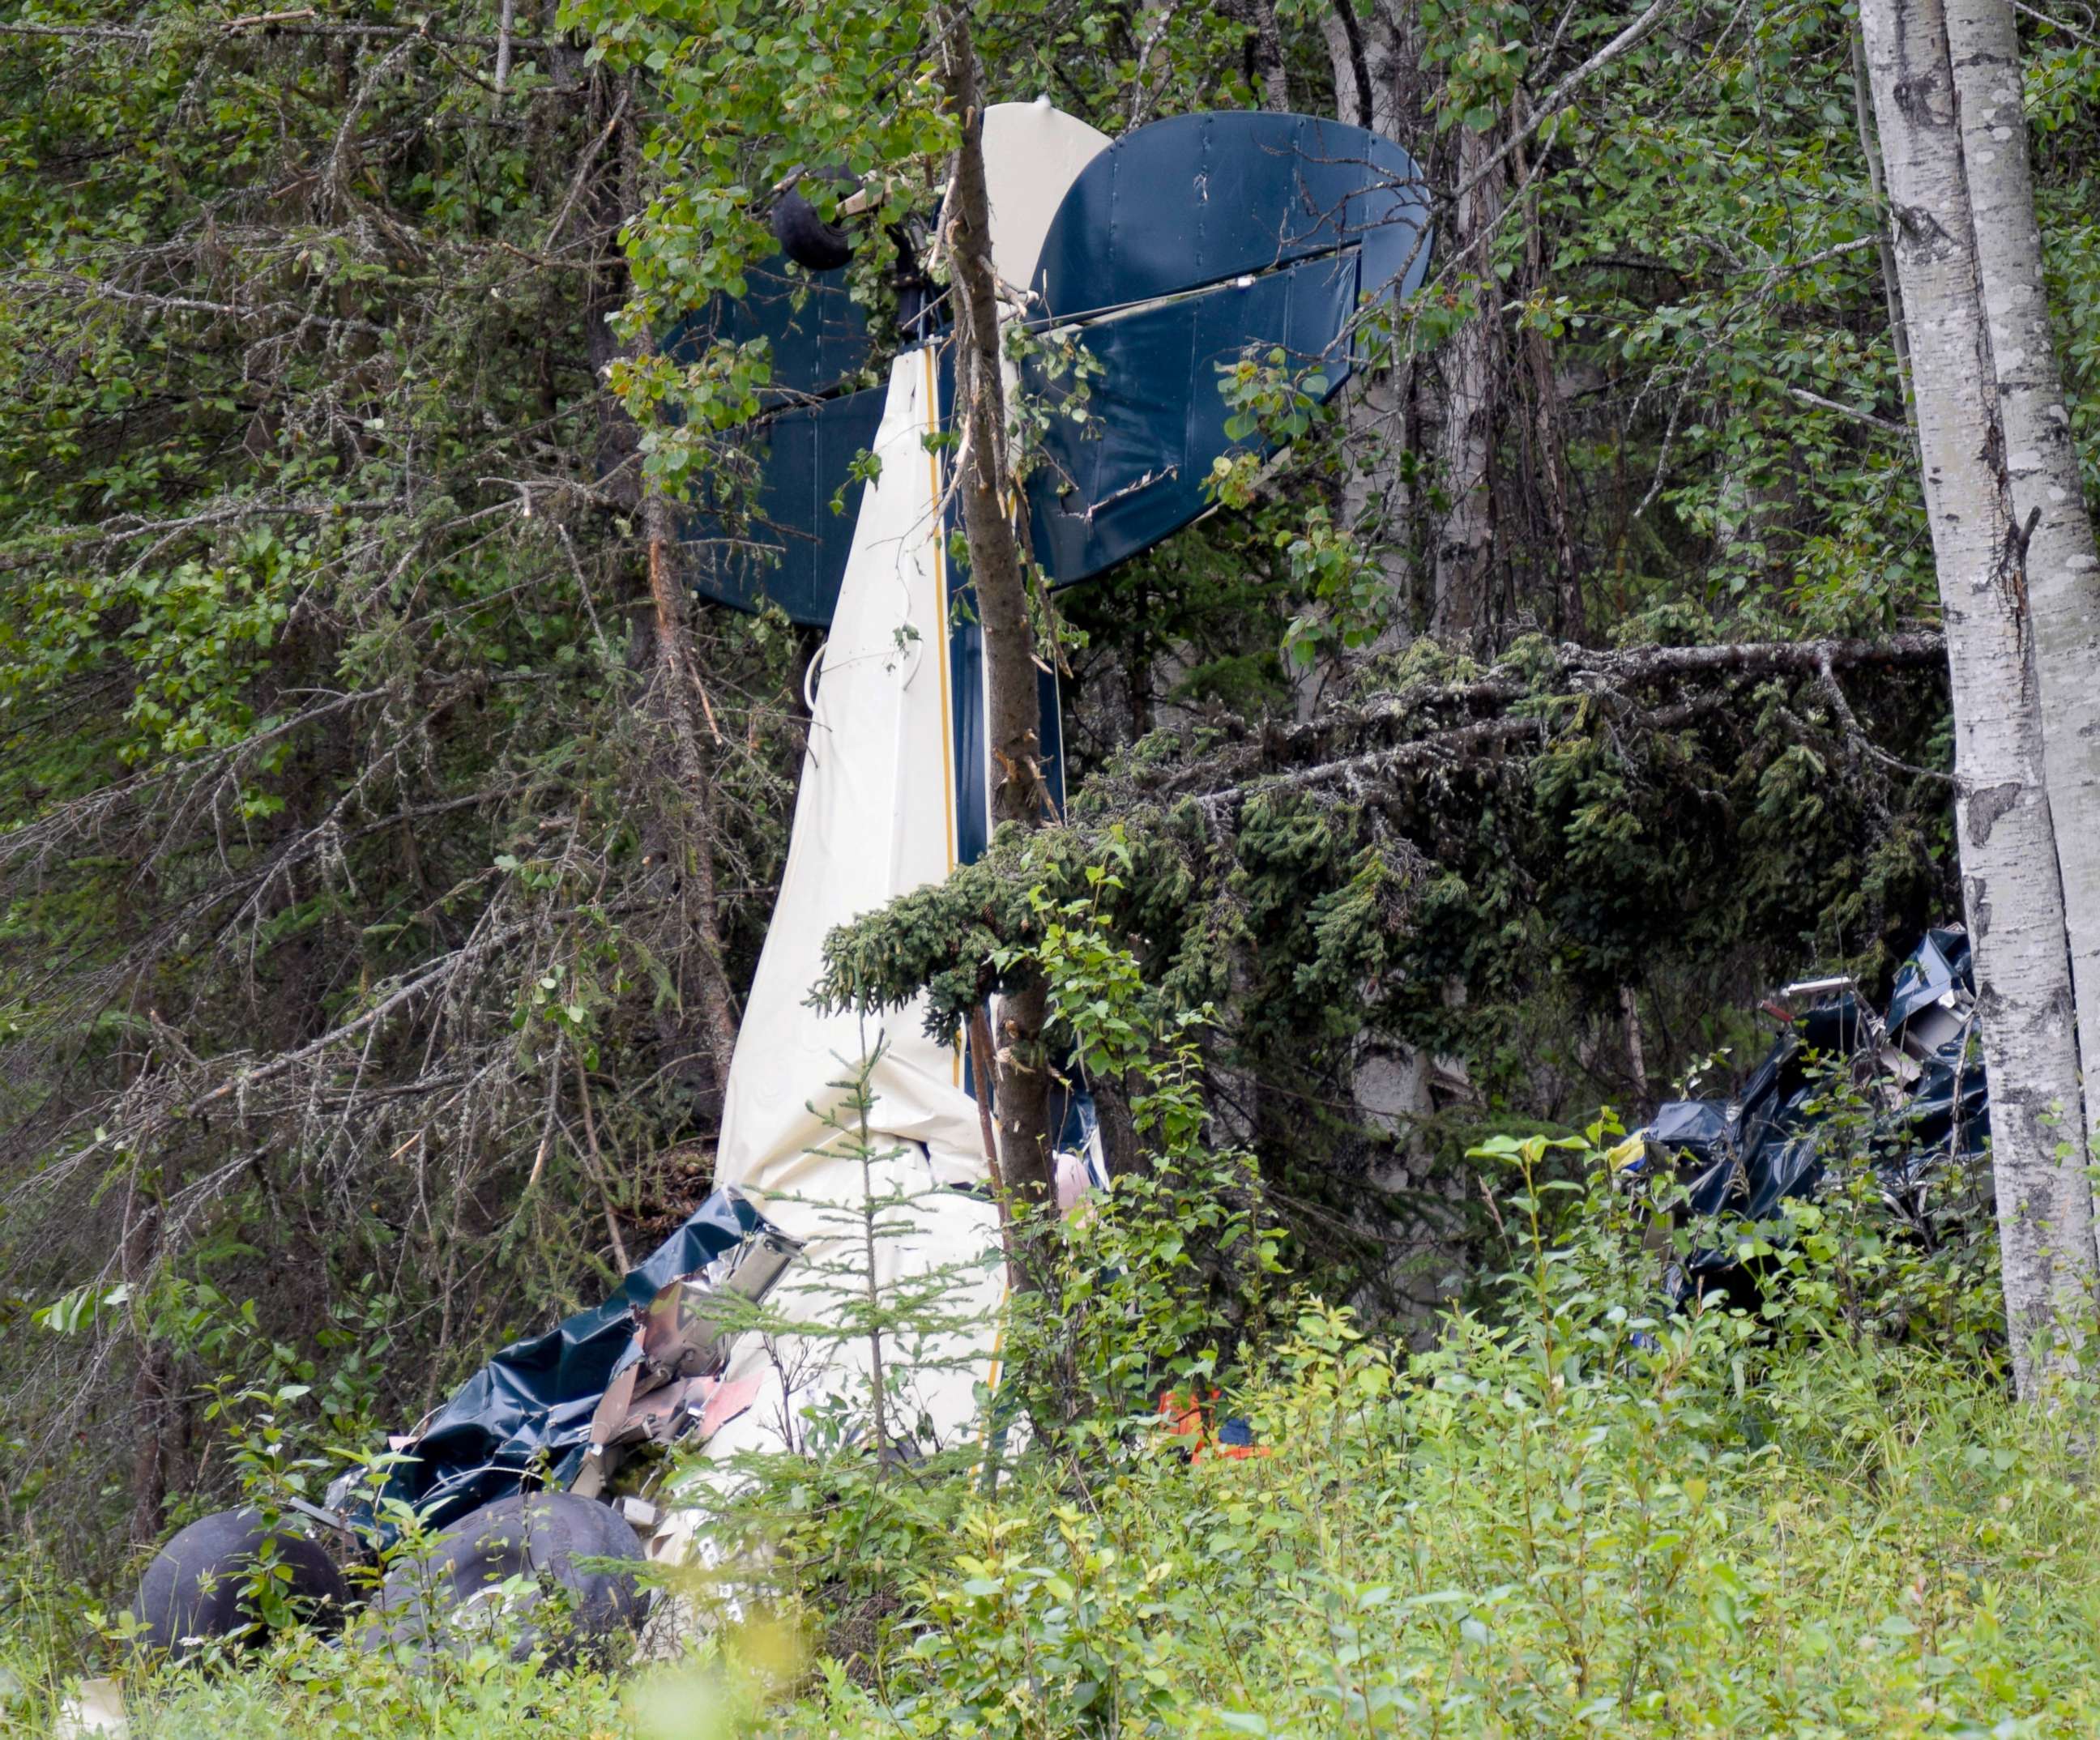 PHOTO: A plane rests in brush and trees after a midair collision outside of Soldotna, Alaska, on July 31, 2020. Seven people, including an Alaska state lawmaker,died when two small airplanes collided in midair near the airport on Alaska's Kenai Peninsula.